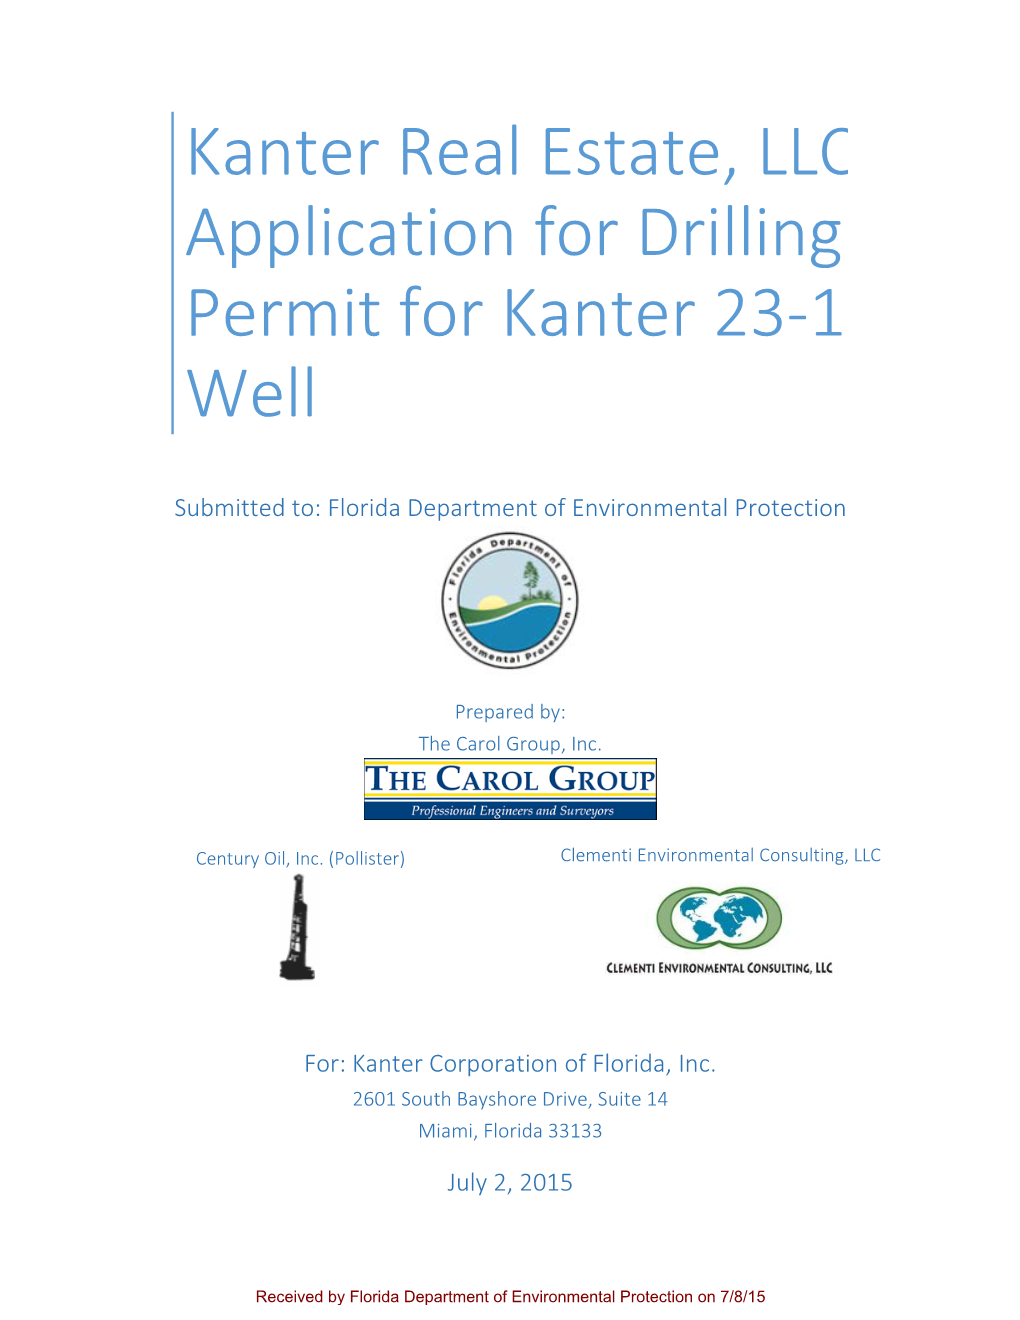 Kanter Corporation Application for Drilling Permit for Kanter 23-1 Well